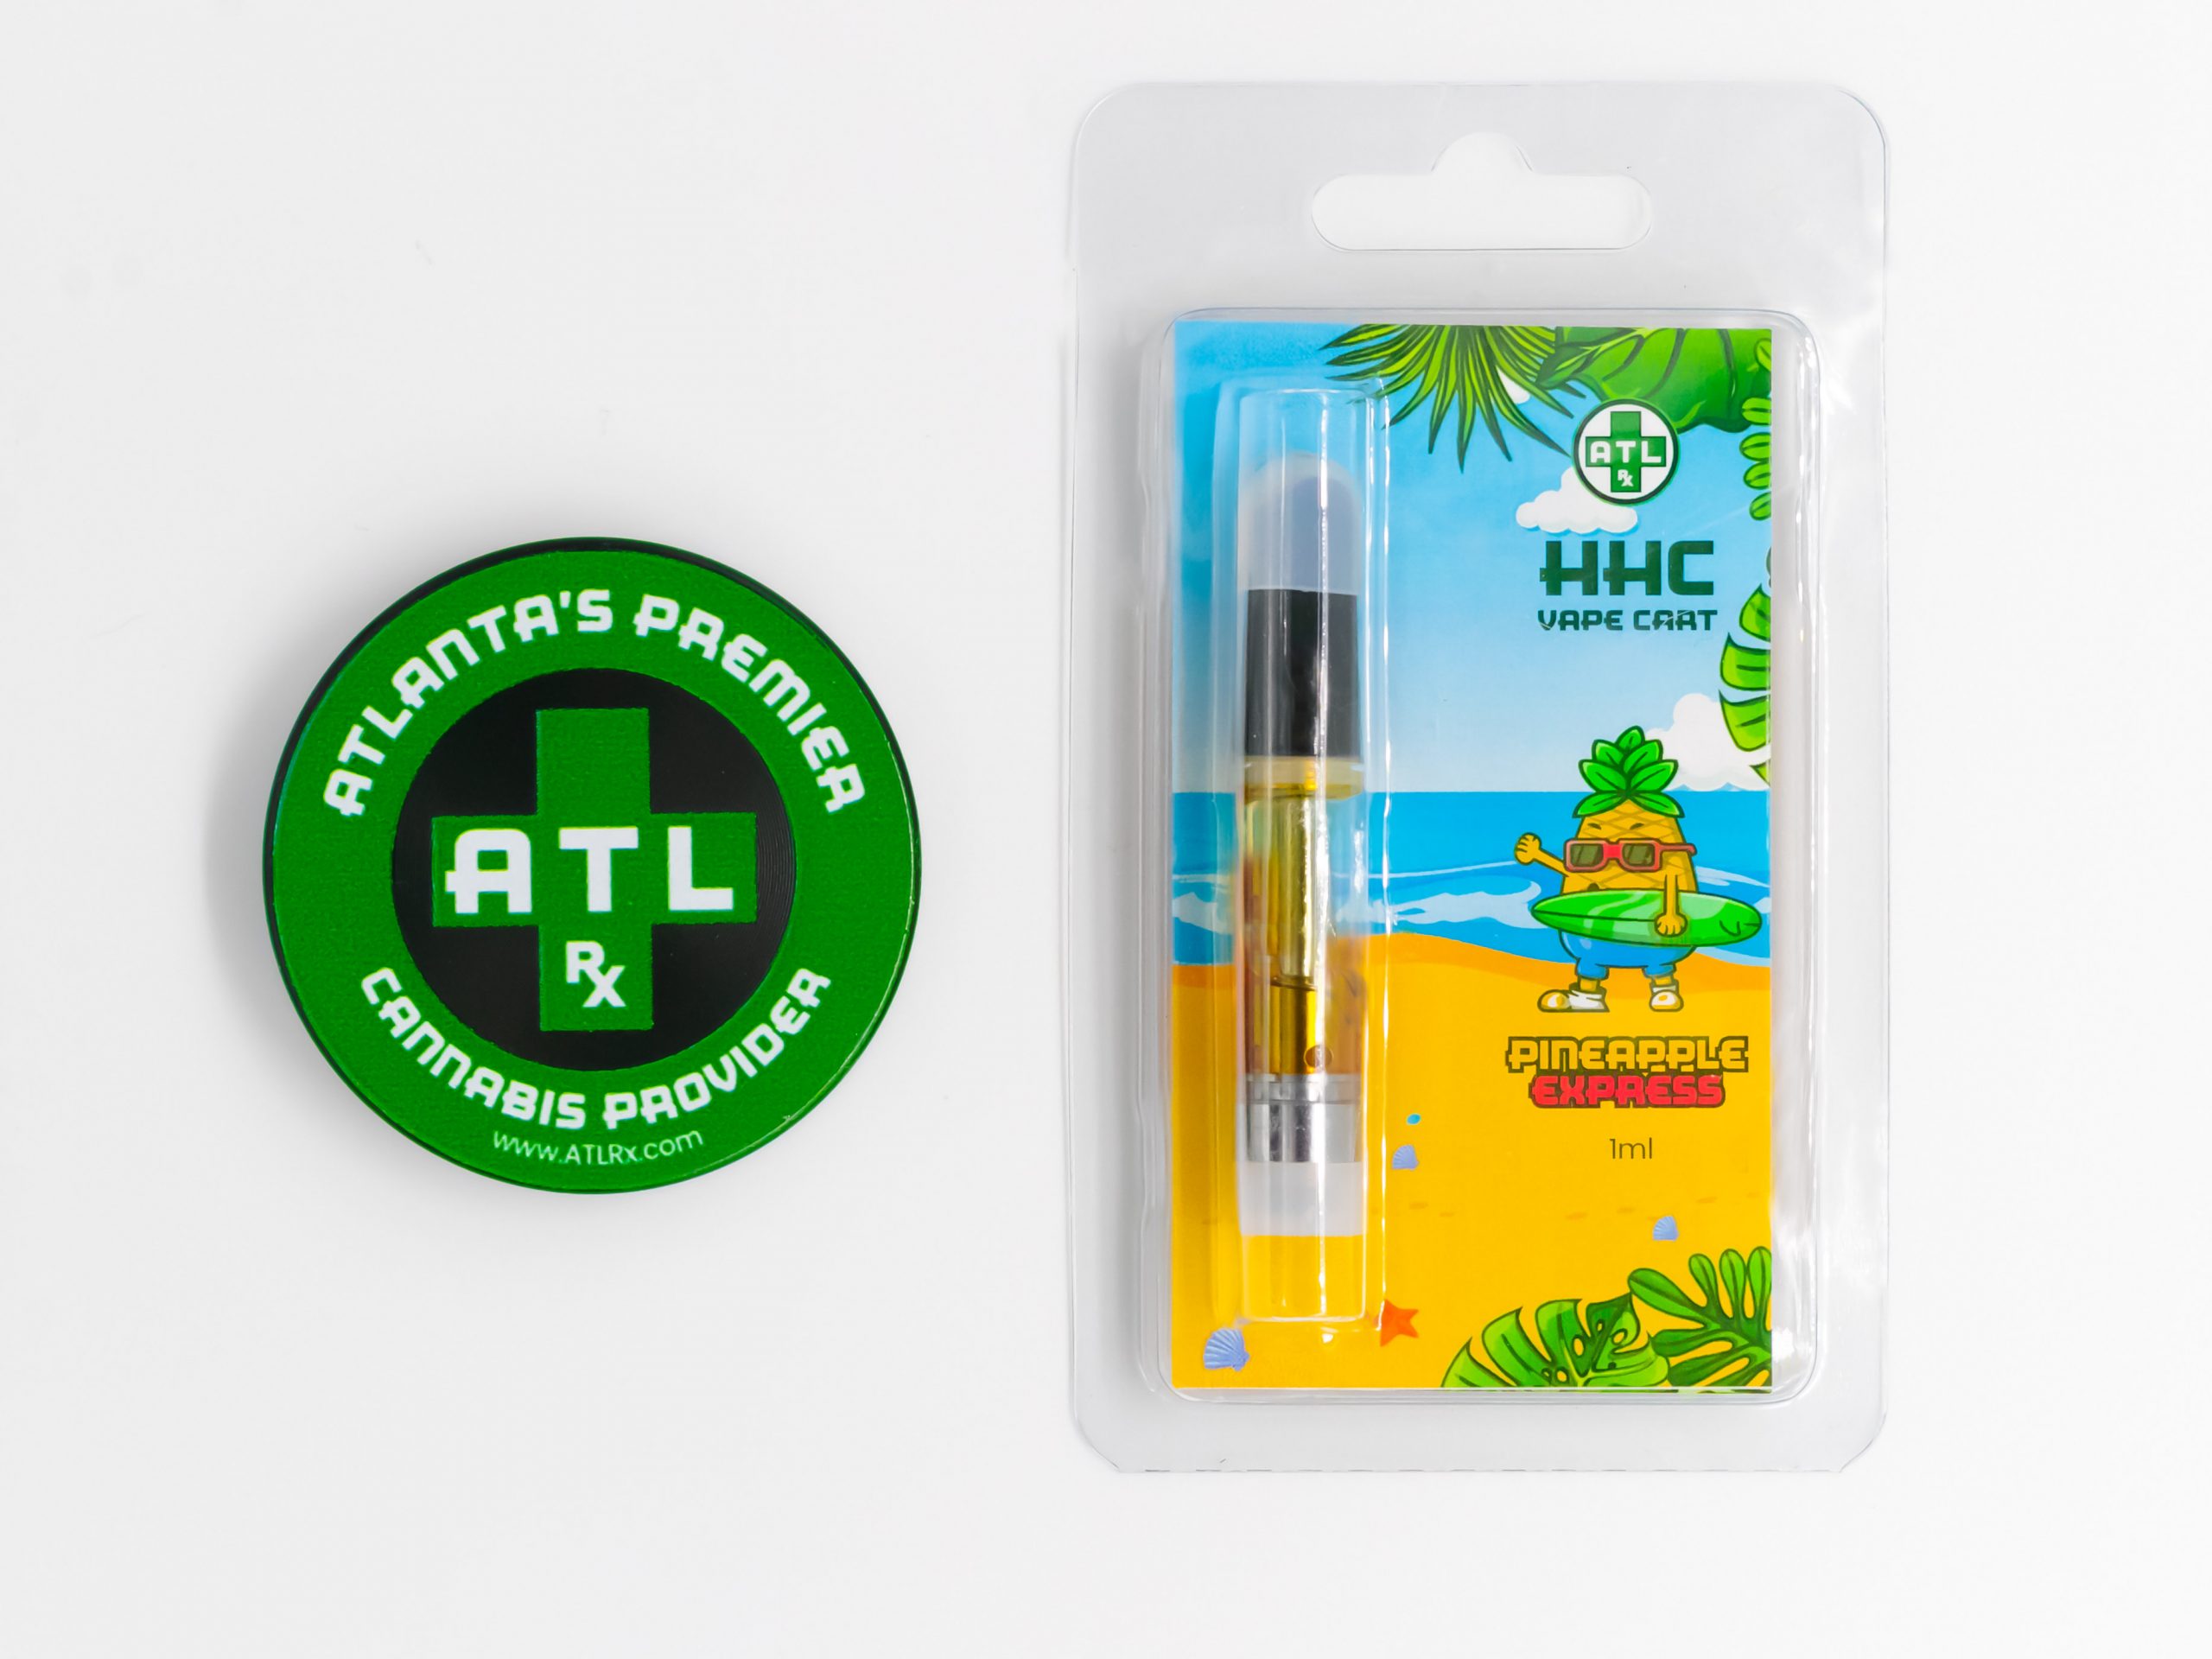 HHC Pineapple Express: The Tropical Spice Sativa